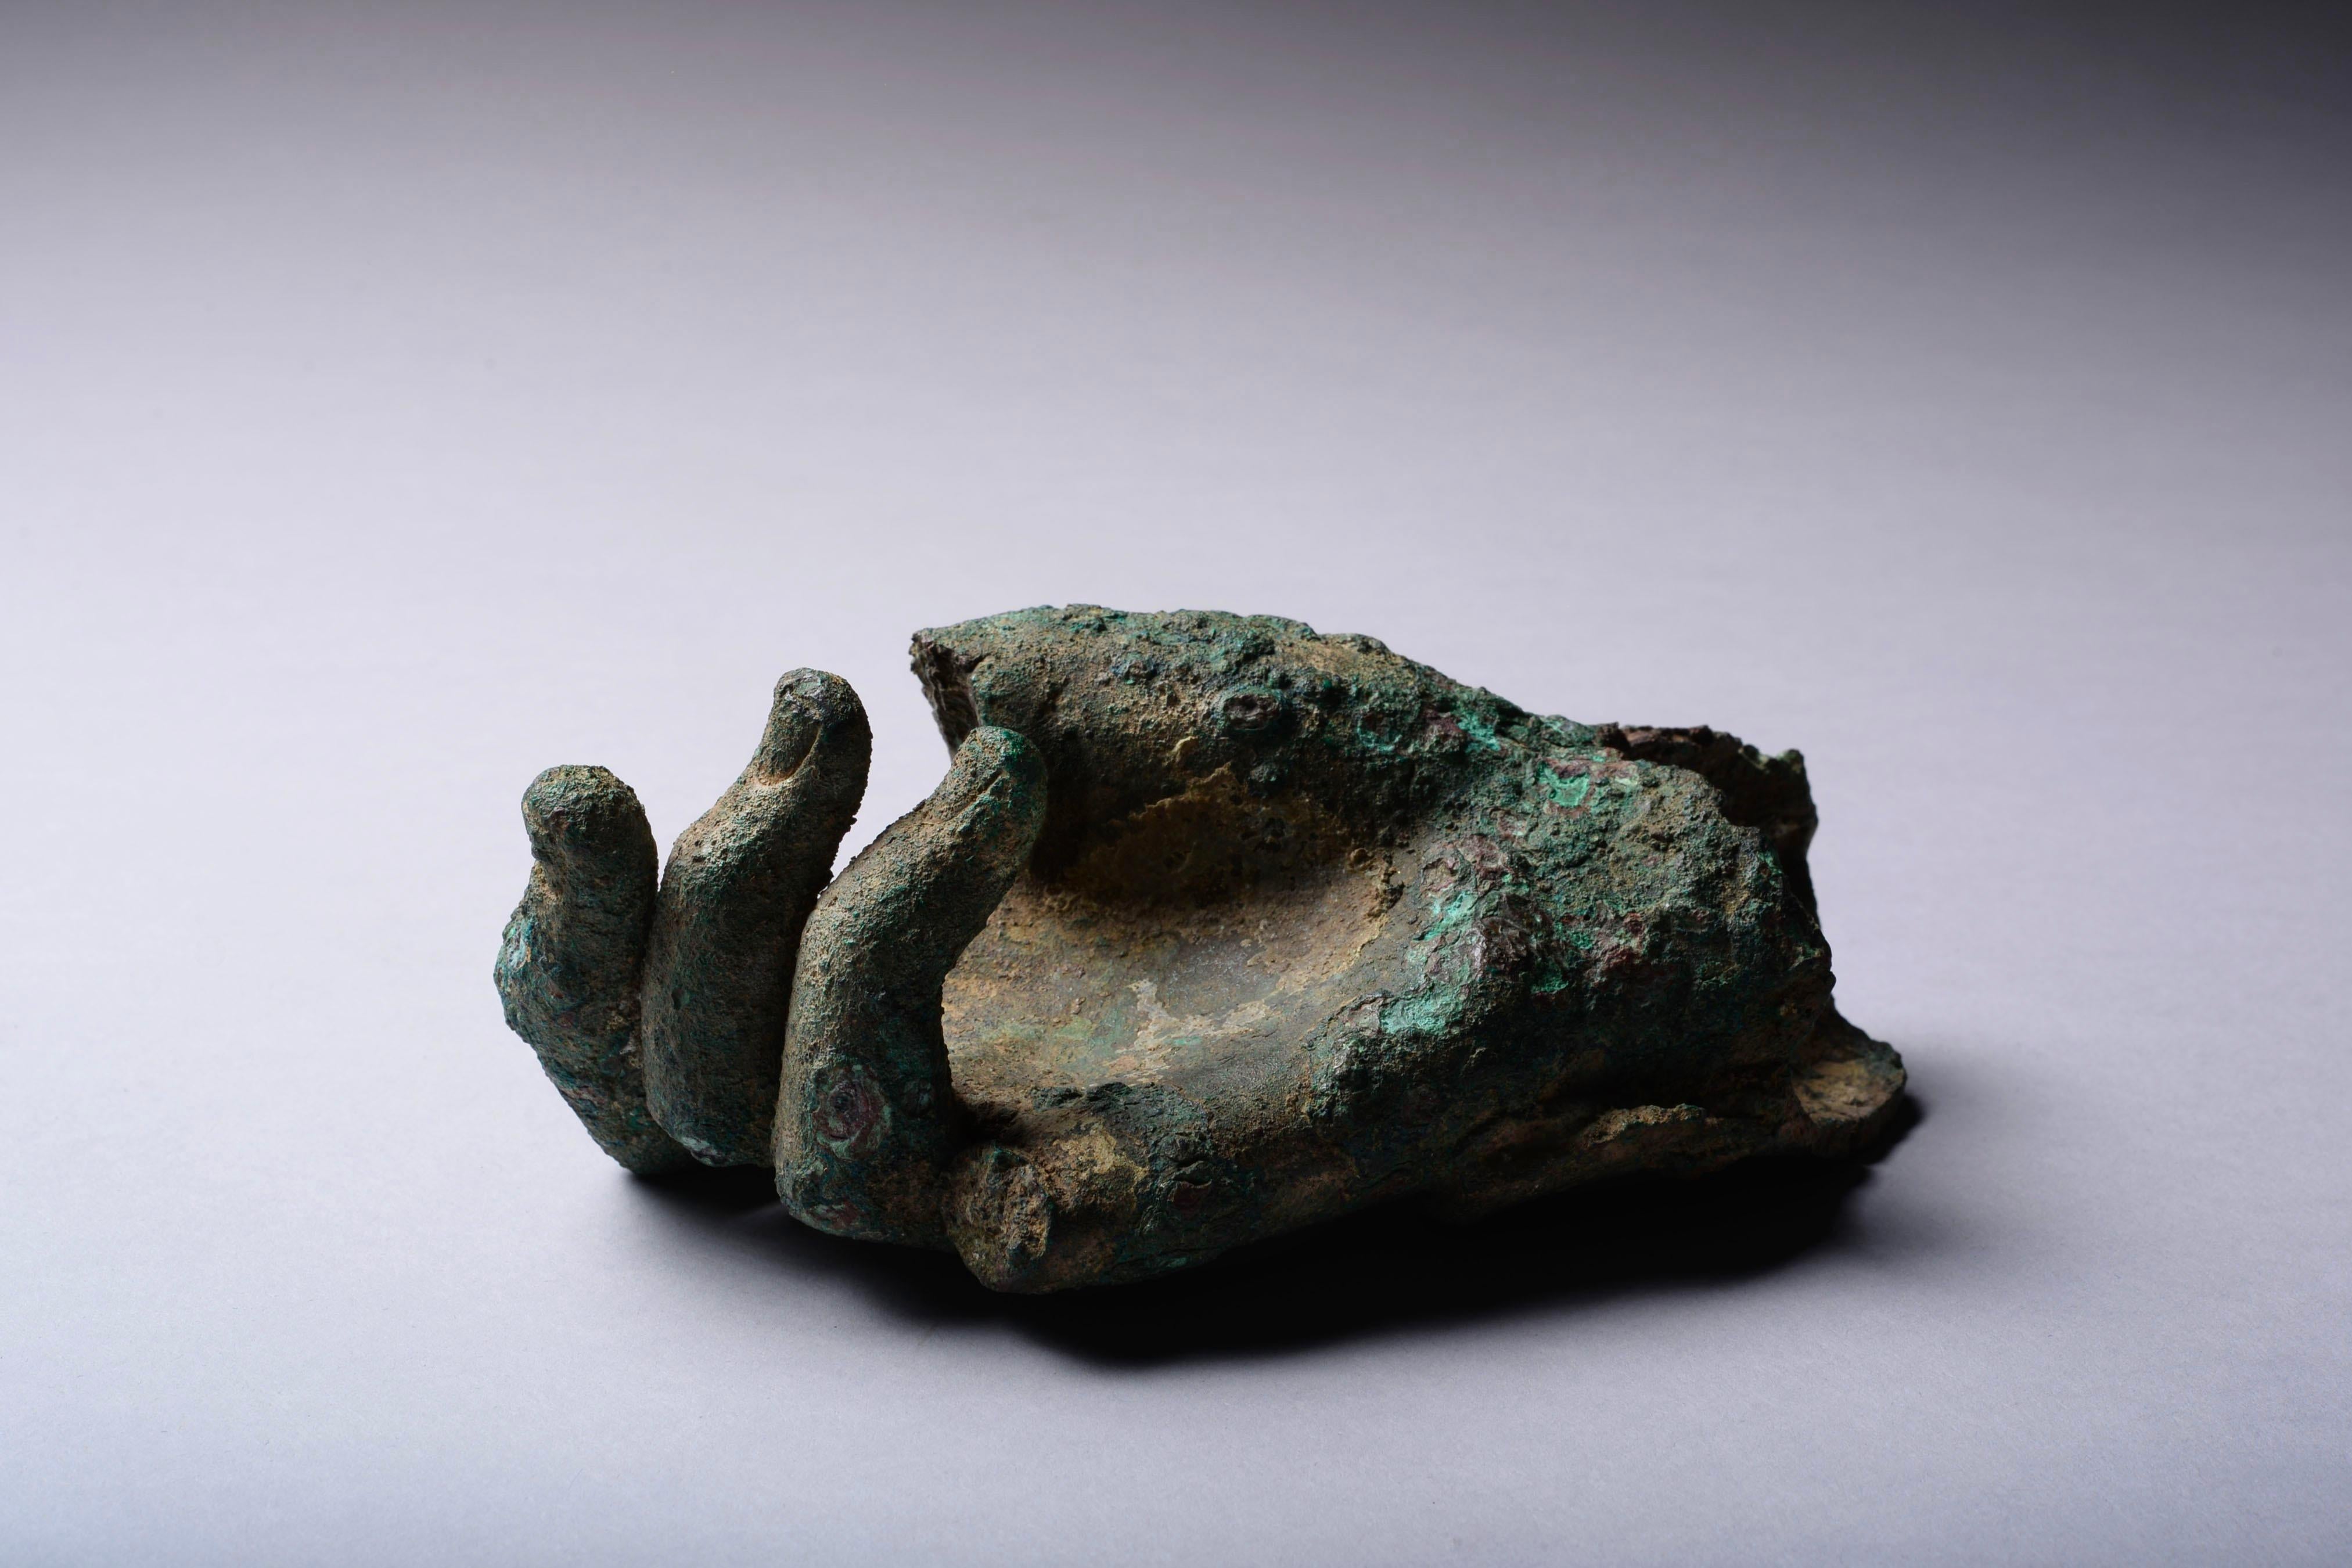 A fragment from a bronze statue, Hellenistic to early Roman 1st BC-1st century AD.

Preserving the right hand and wrist, the thumb and small finger lost, the remaining fingers finely modelled and curled towards the palm, presumably once grasping a